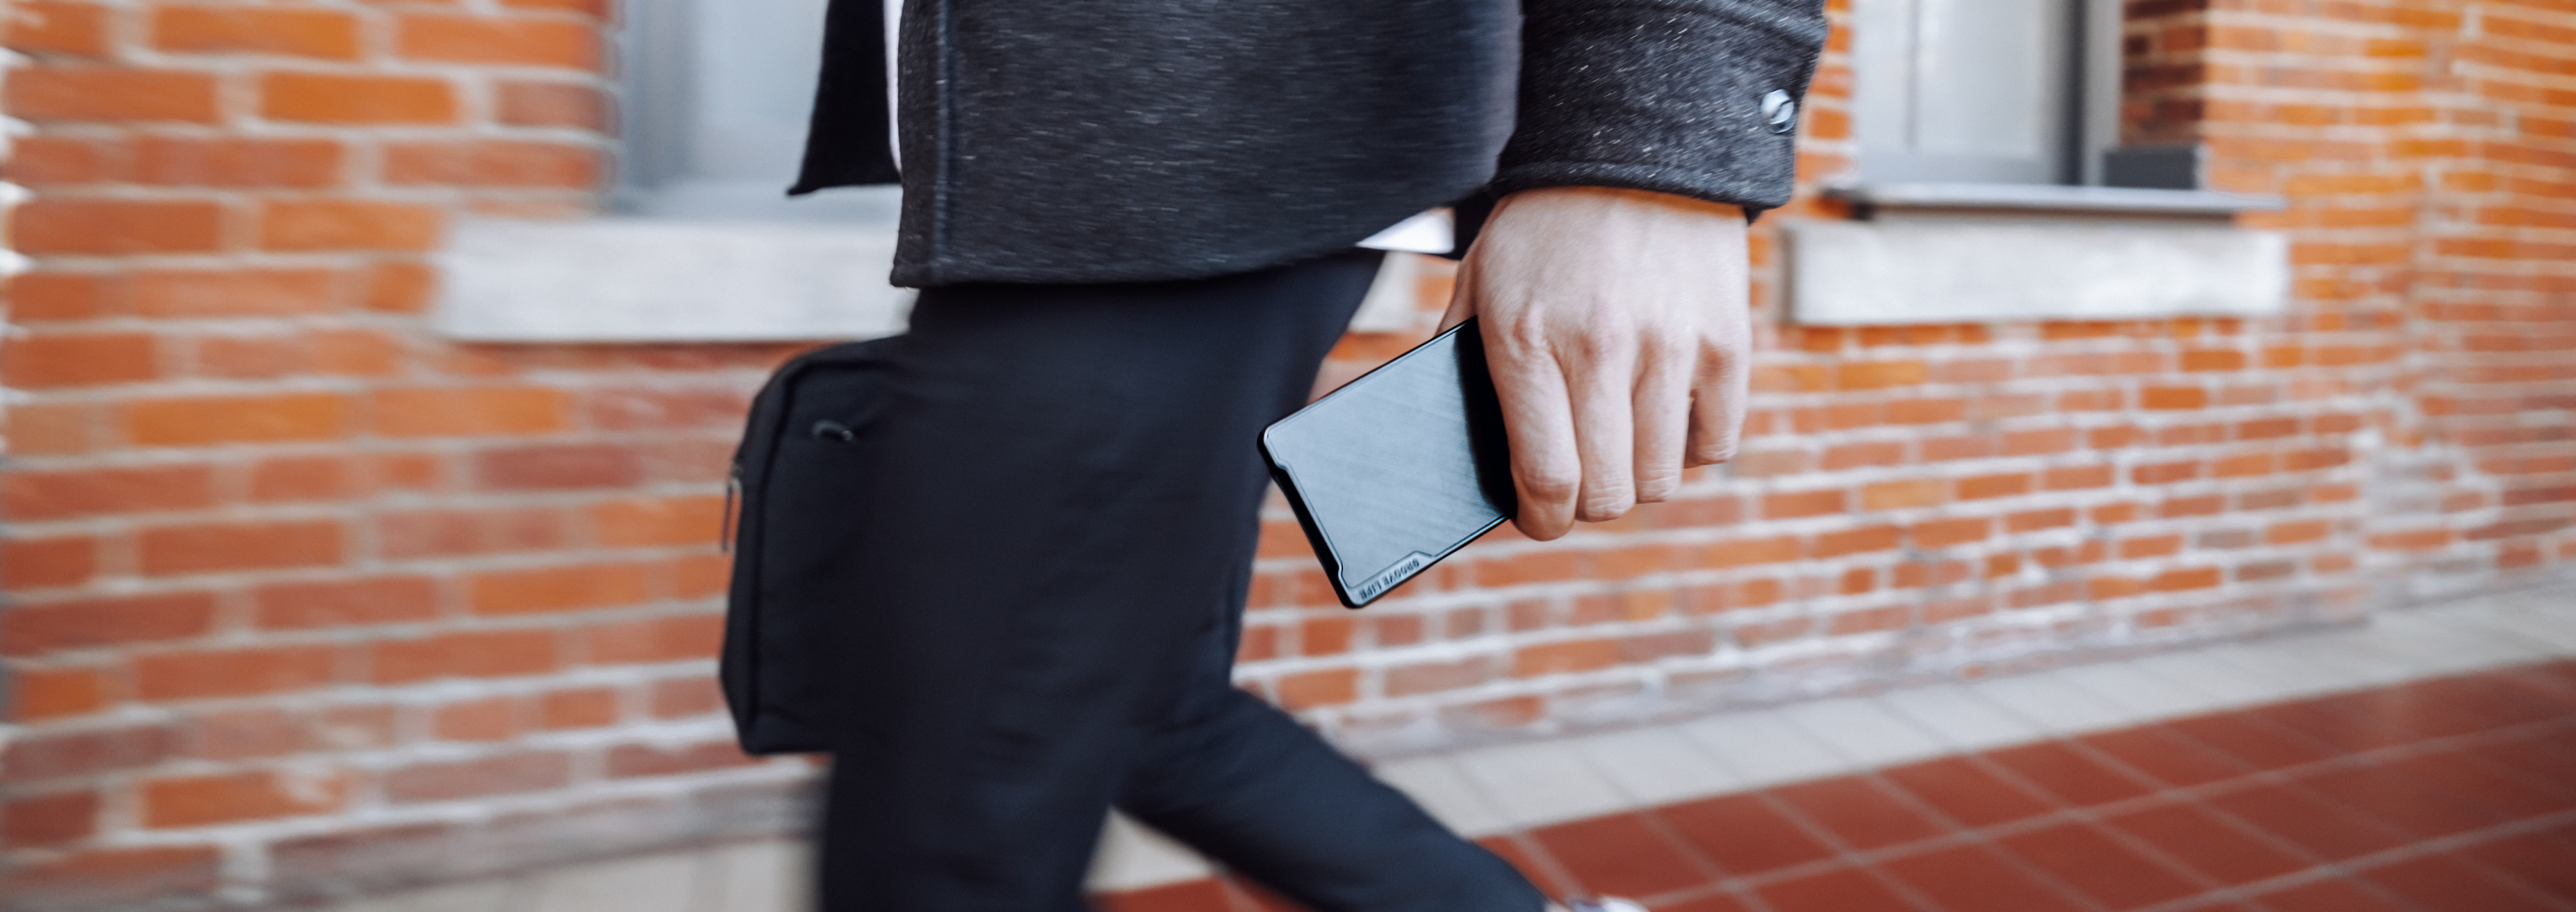 Groove Smart Wallet Trace - Midnight Black lifestyle image 2